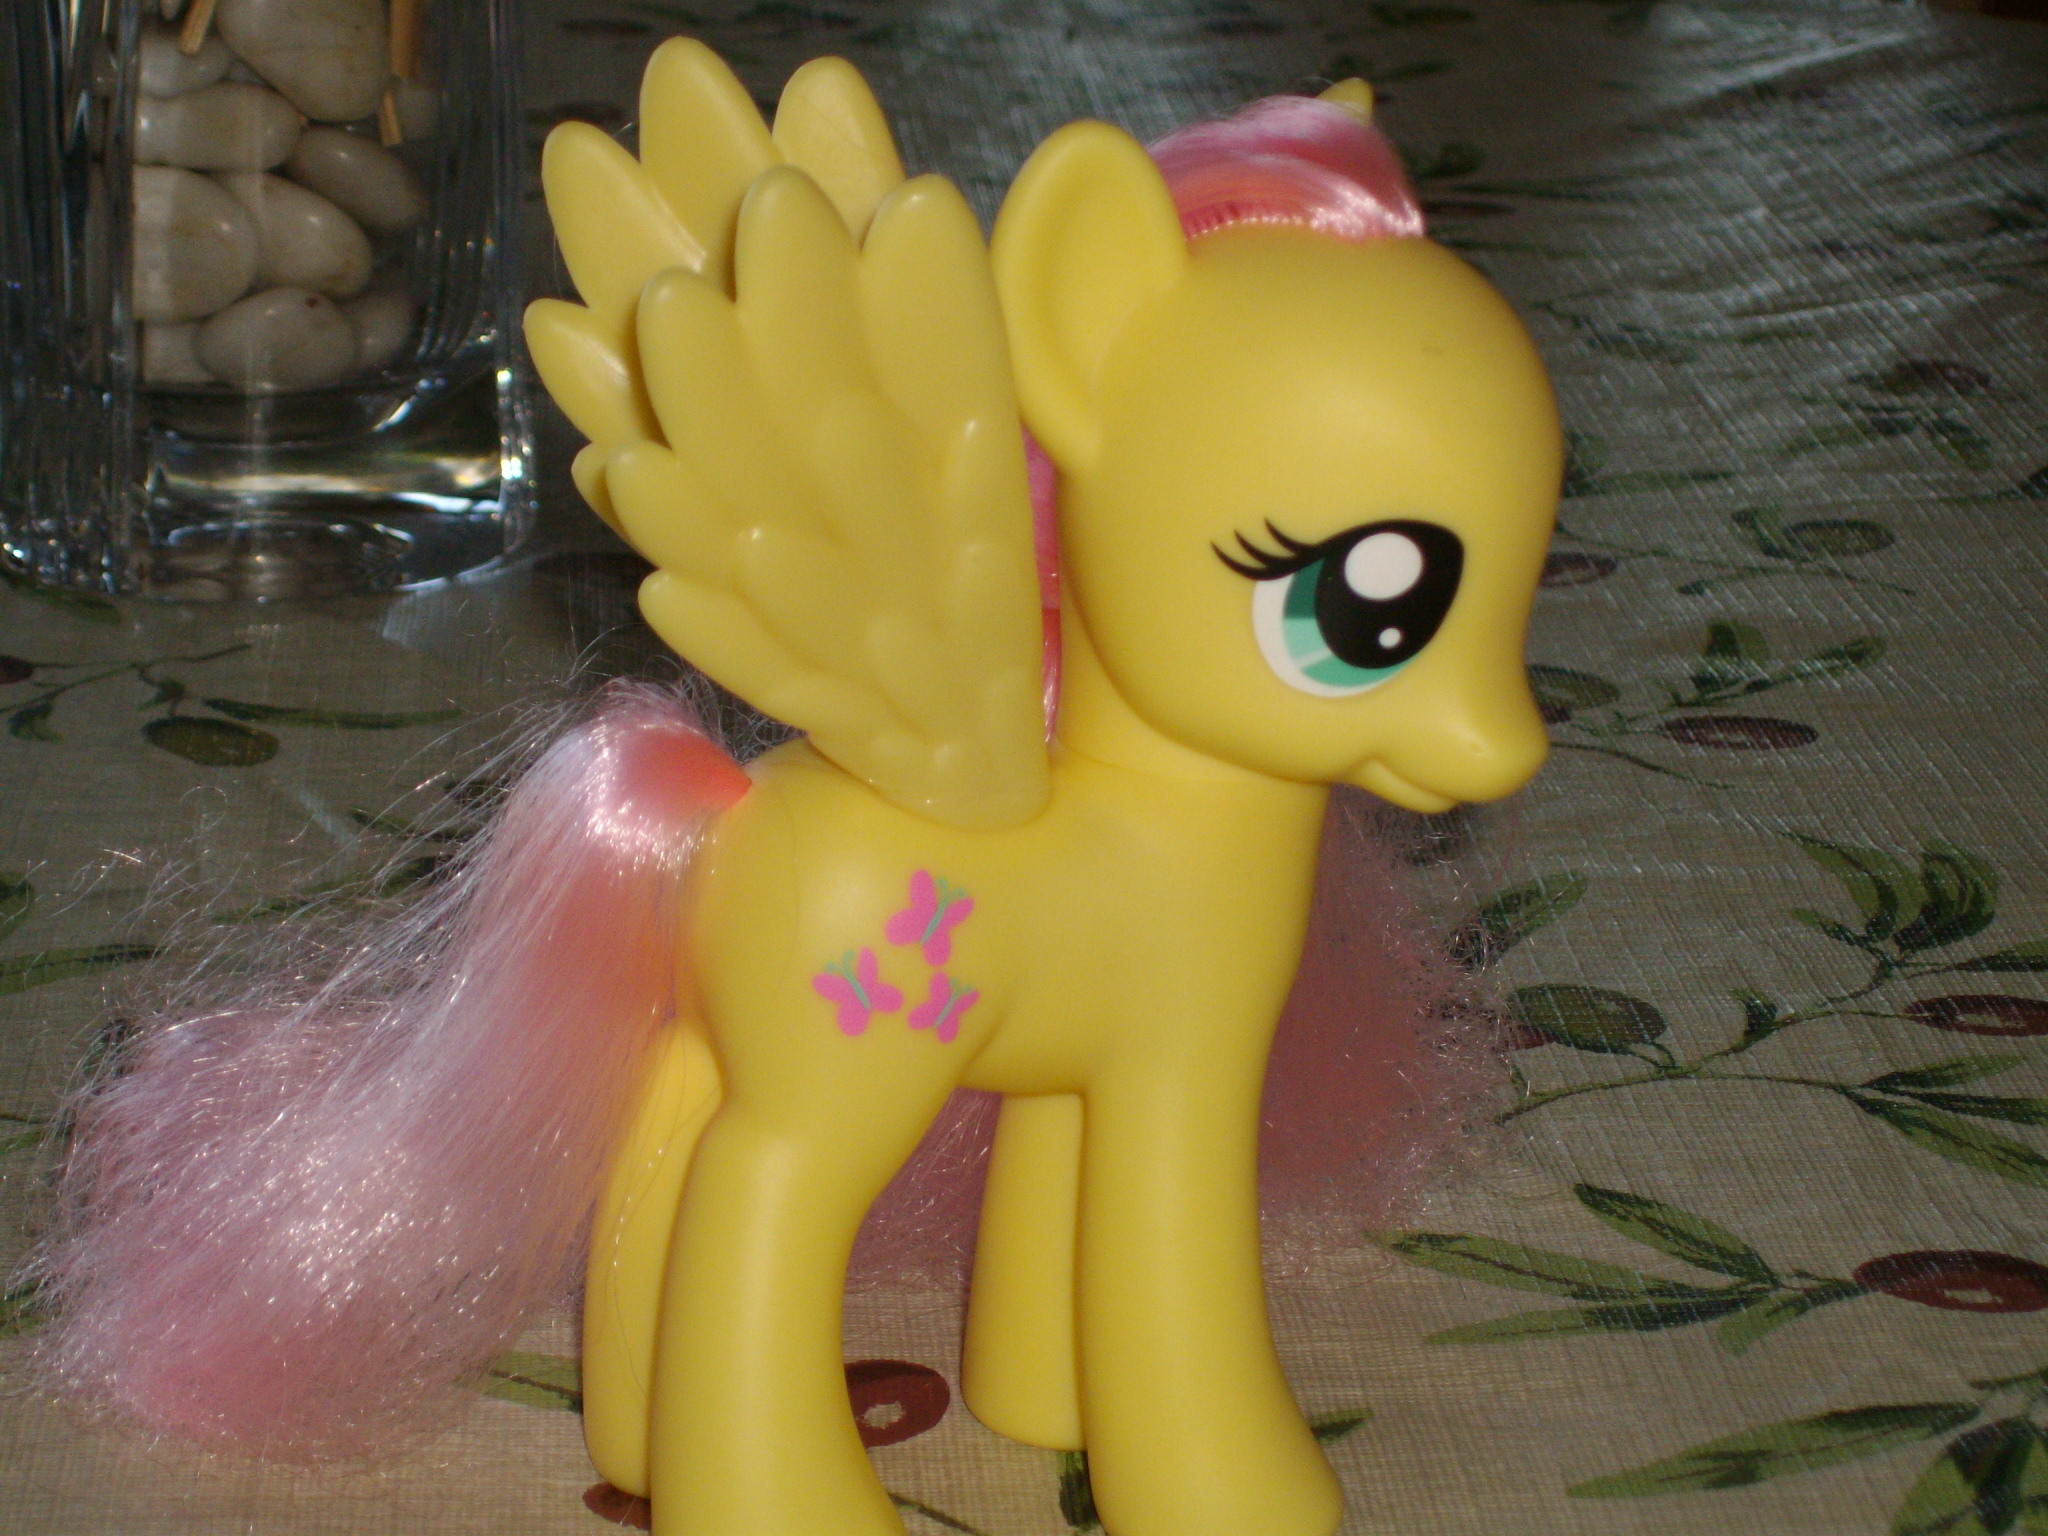 http://images4.wikia.nocookie.net/__cb20120103161943/mlp/images/1/14/Fashion_style_Fluttershy_Toy.jpg